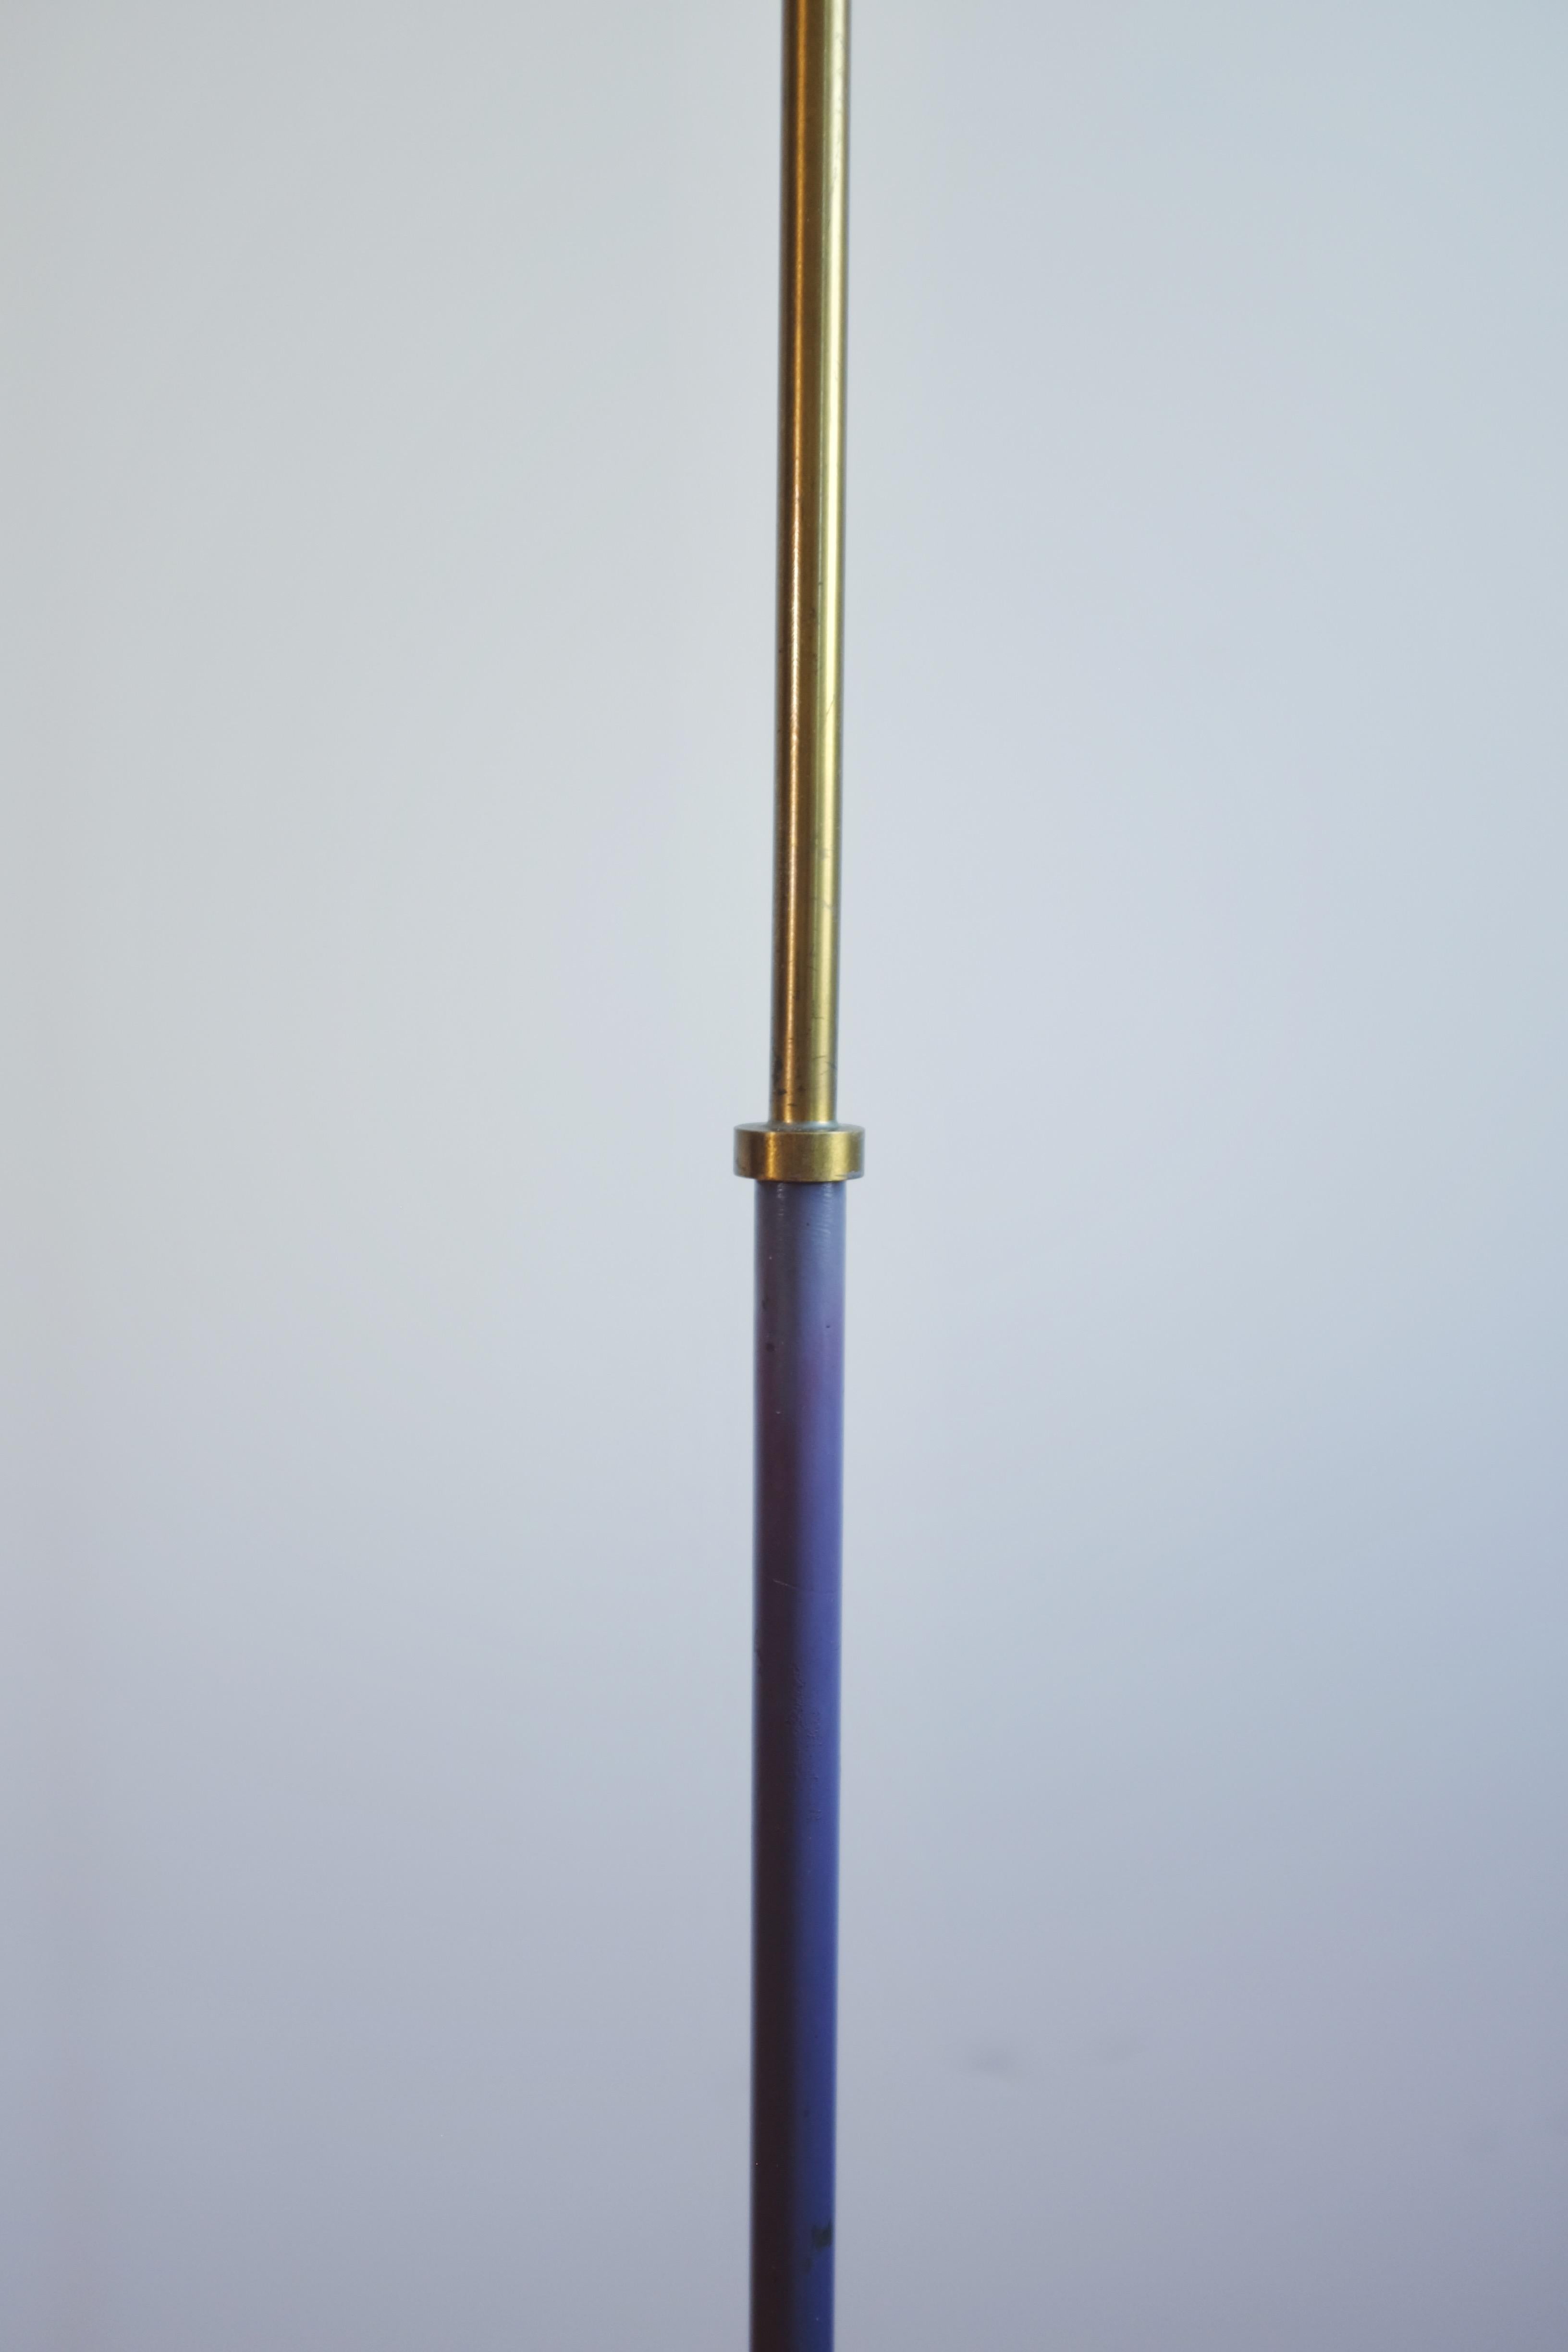 Rare 1950's Lilac painted metal and Brass Floor lamp Model S-1871 by Hans-Agne Jakobsson. Produced by the designers own company Hans-Agne Jakobsson AB in Markaryd, Sweden. Age appropriate wear to the foot with patina and small marks. Otherwise in a